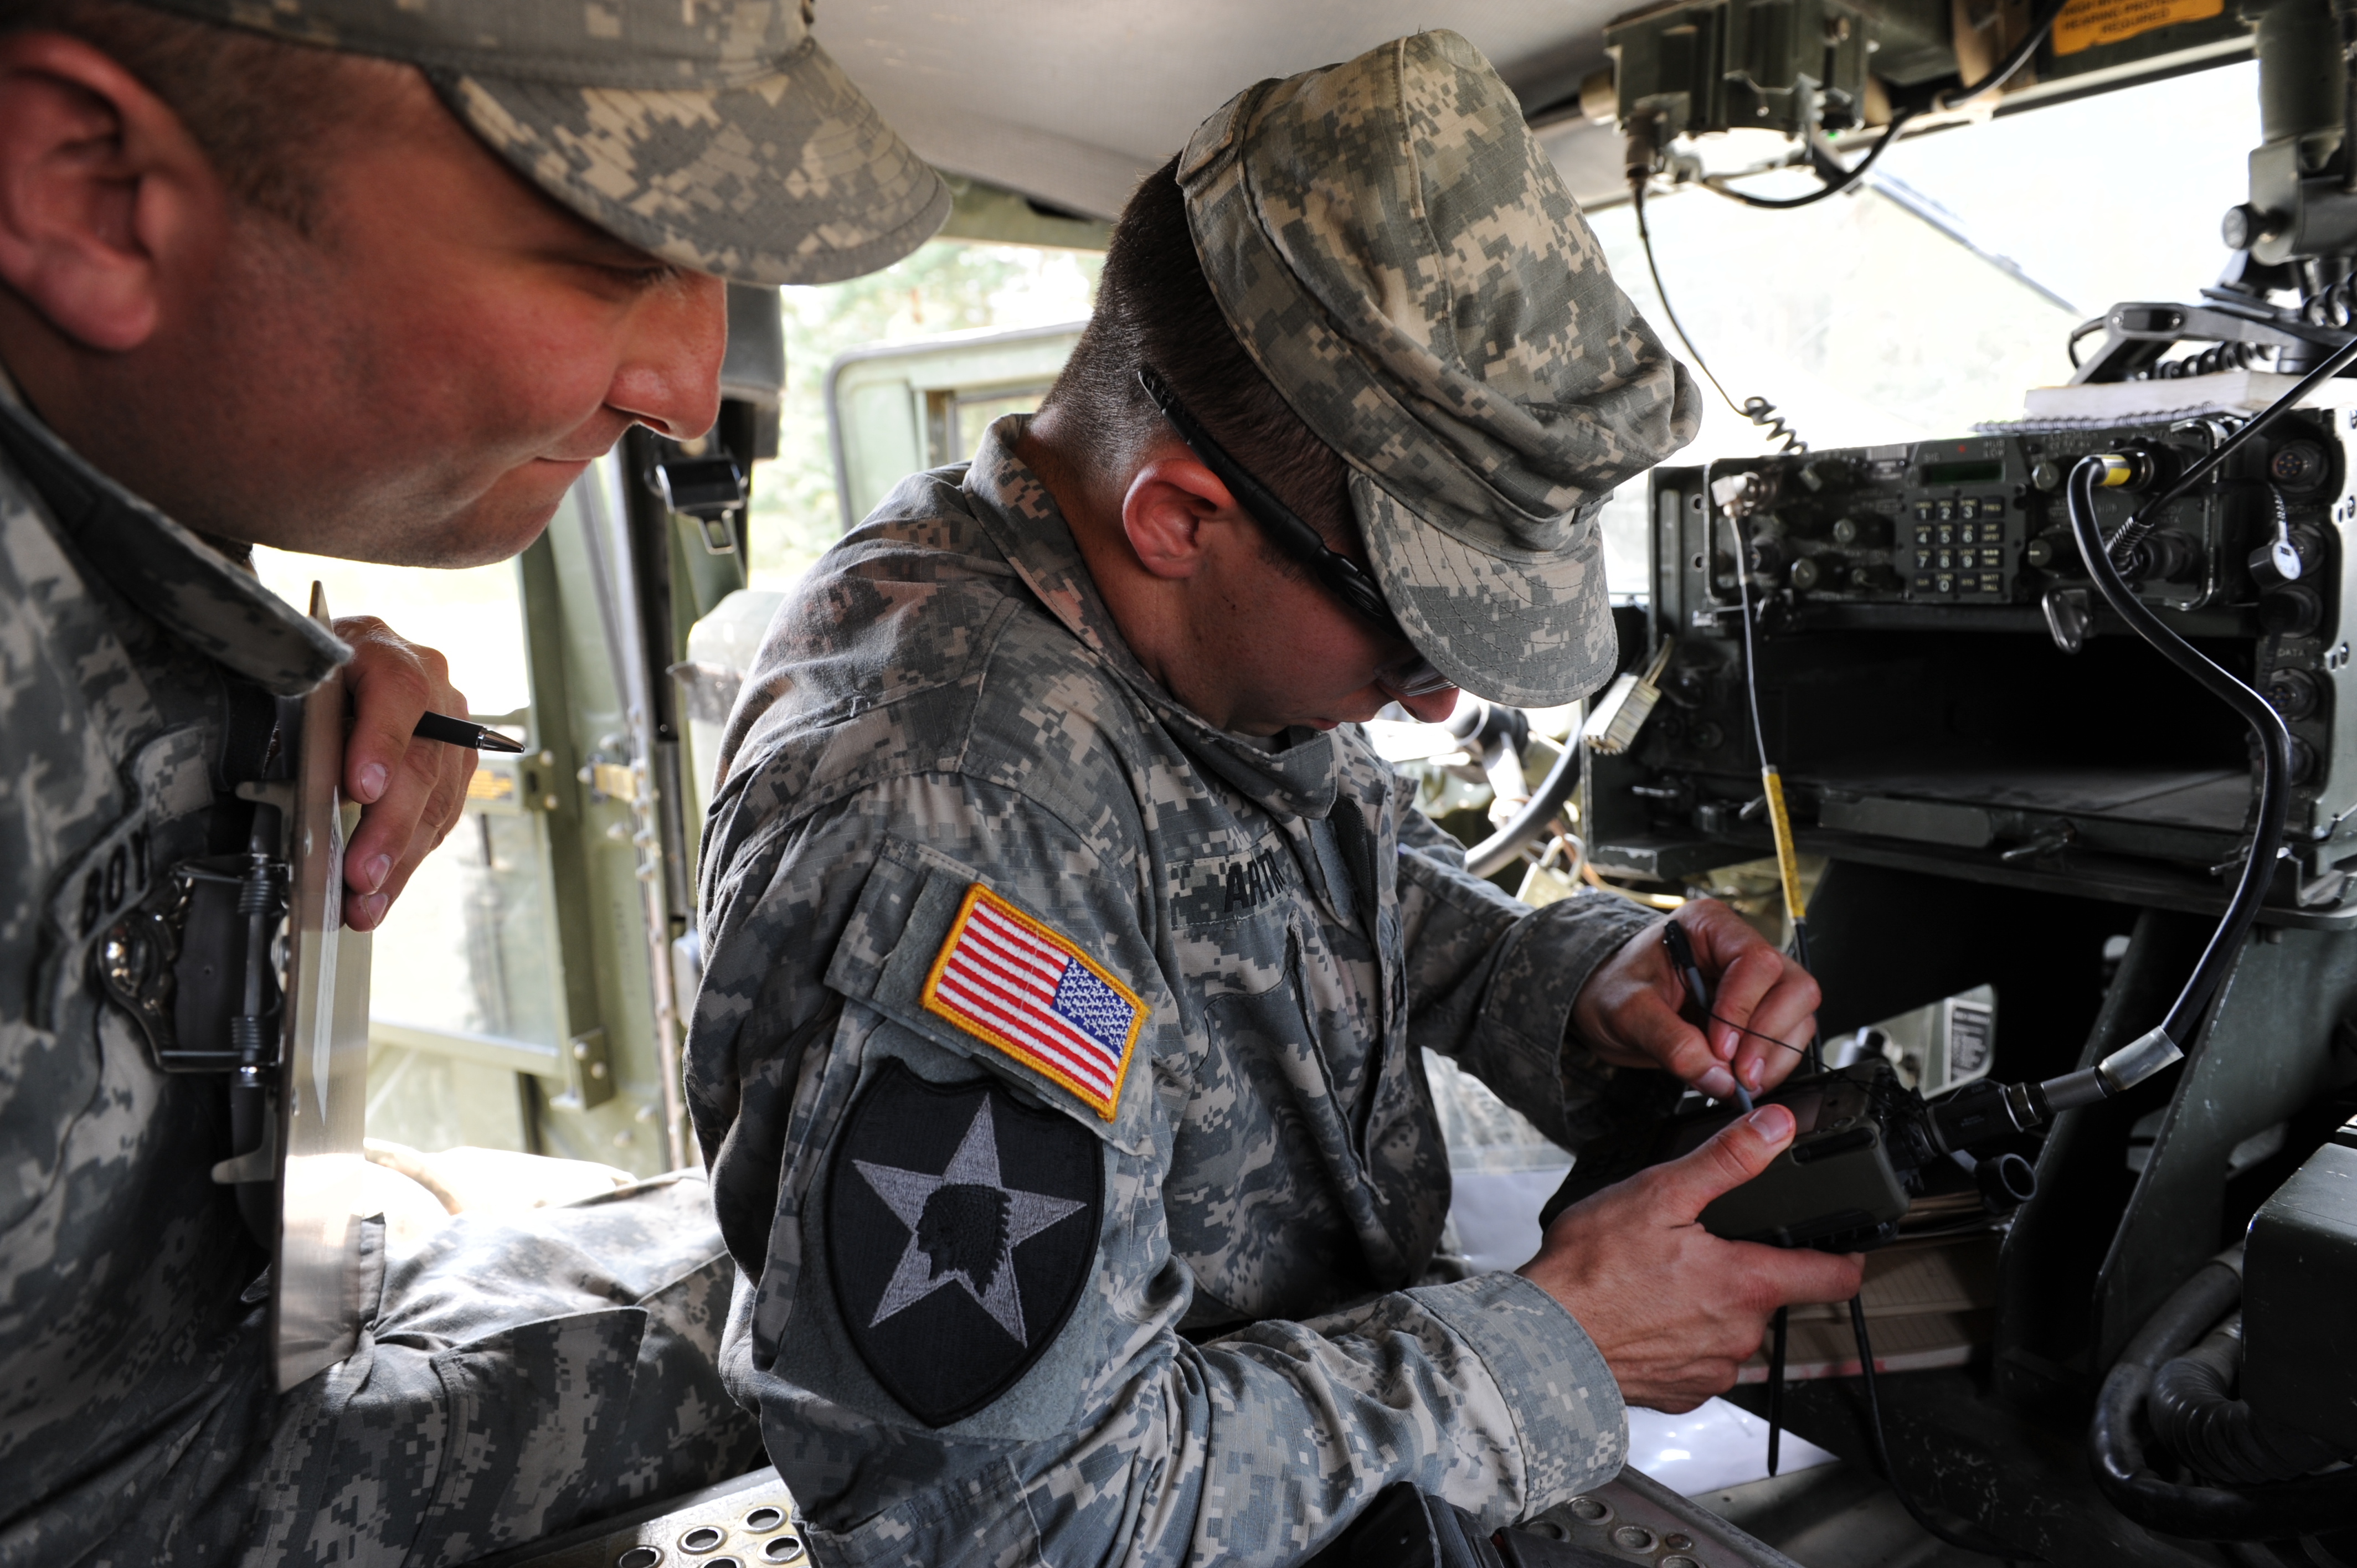 Radio communication is a critical part of warfighting efforts.